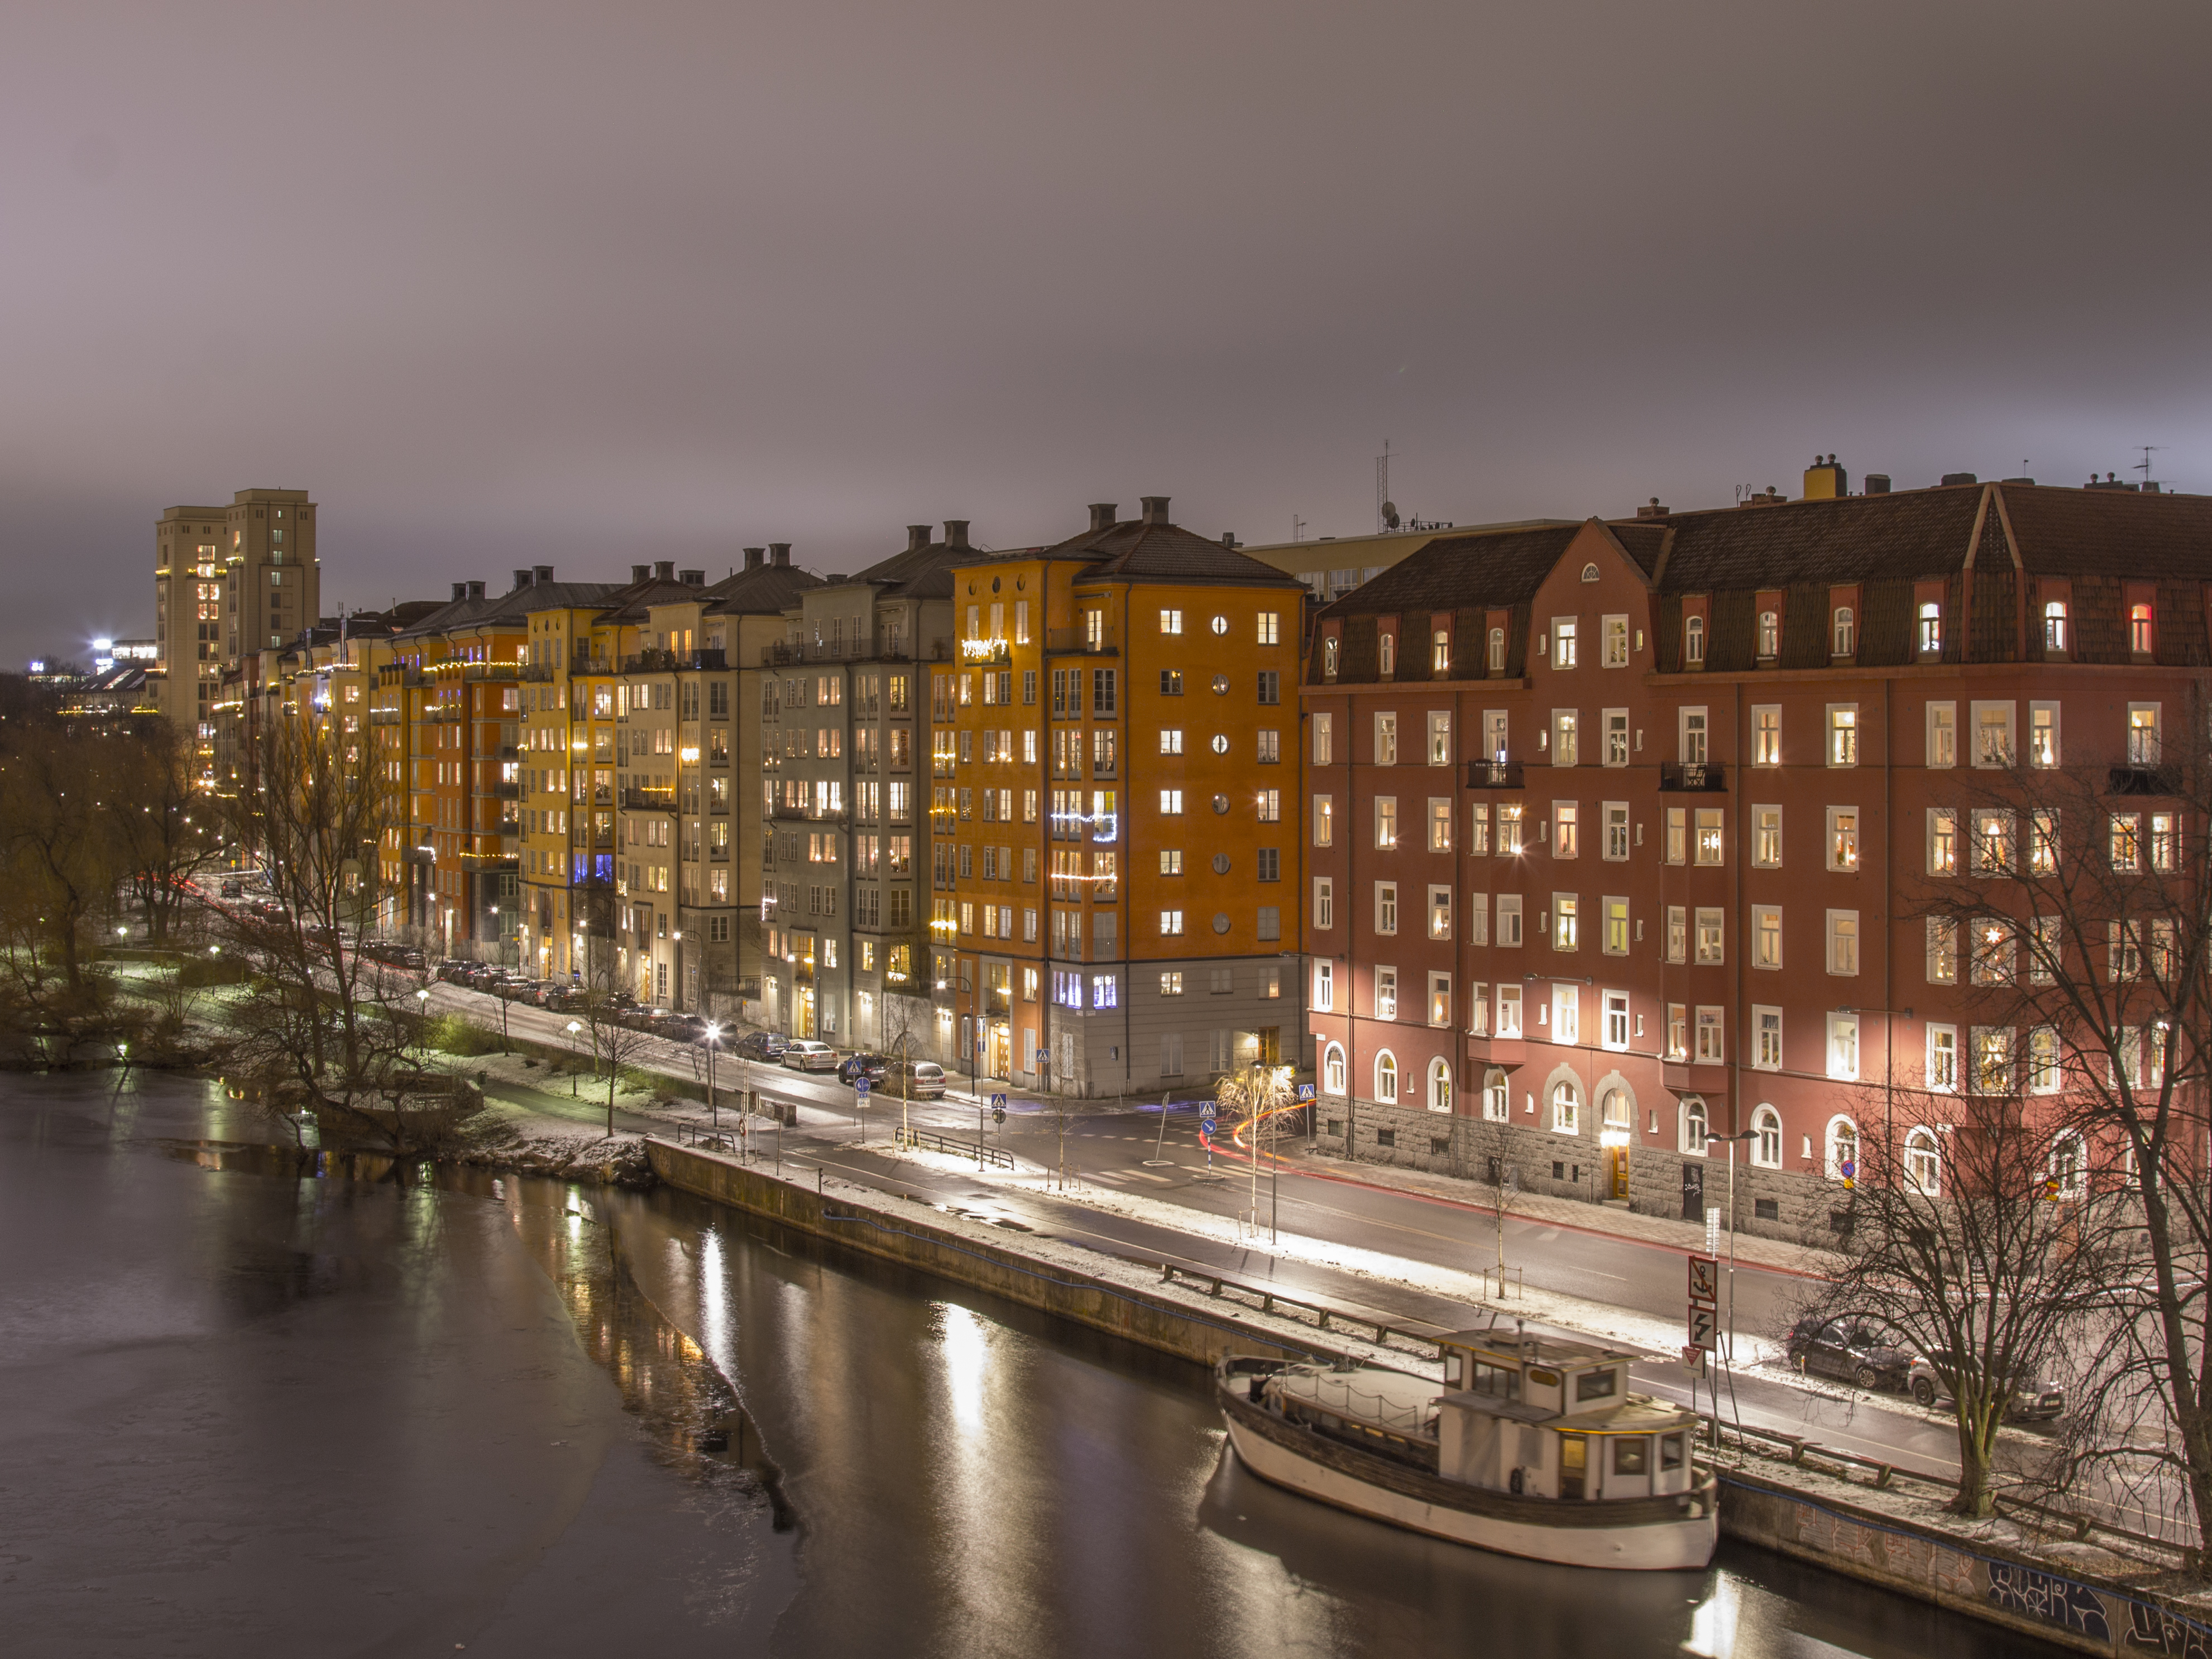 man made, stockholm, building, city, house, street, sweden, winter, cities